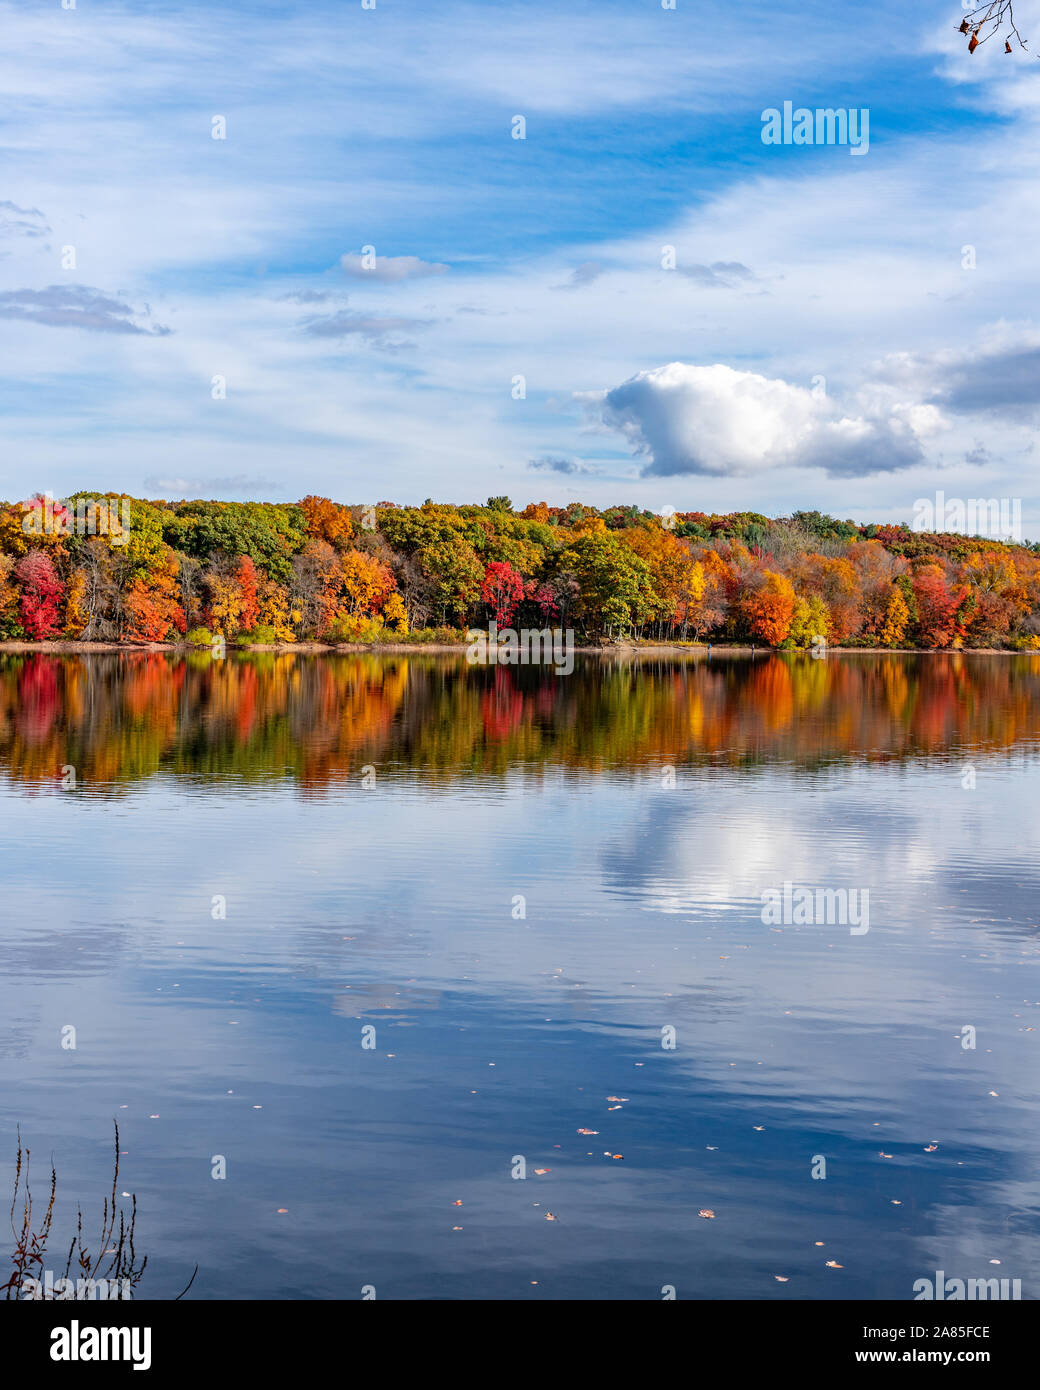 Colorful fall trees reflecting in lake under blue skies. Stock Photo